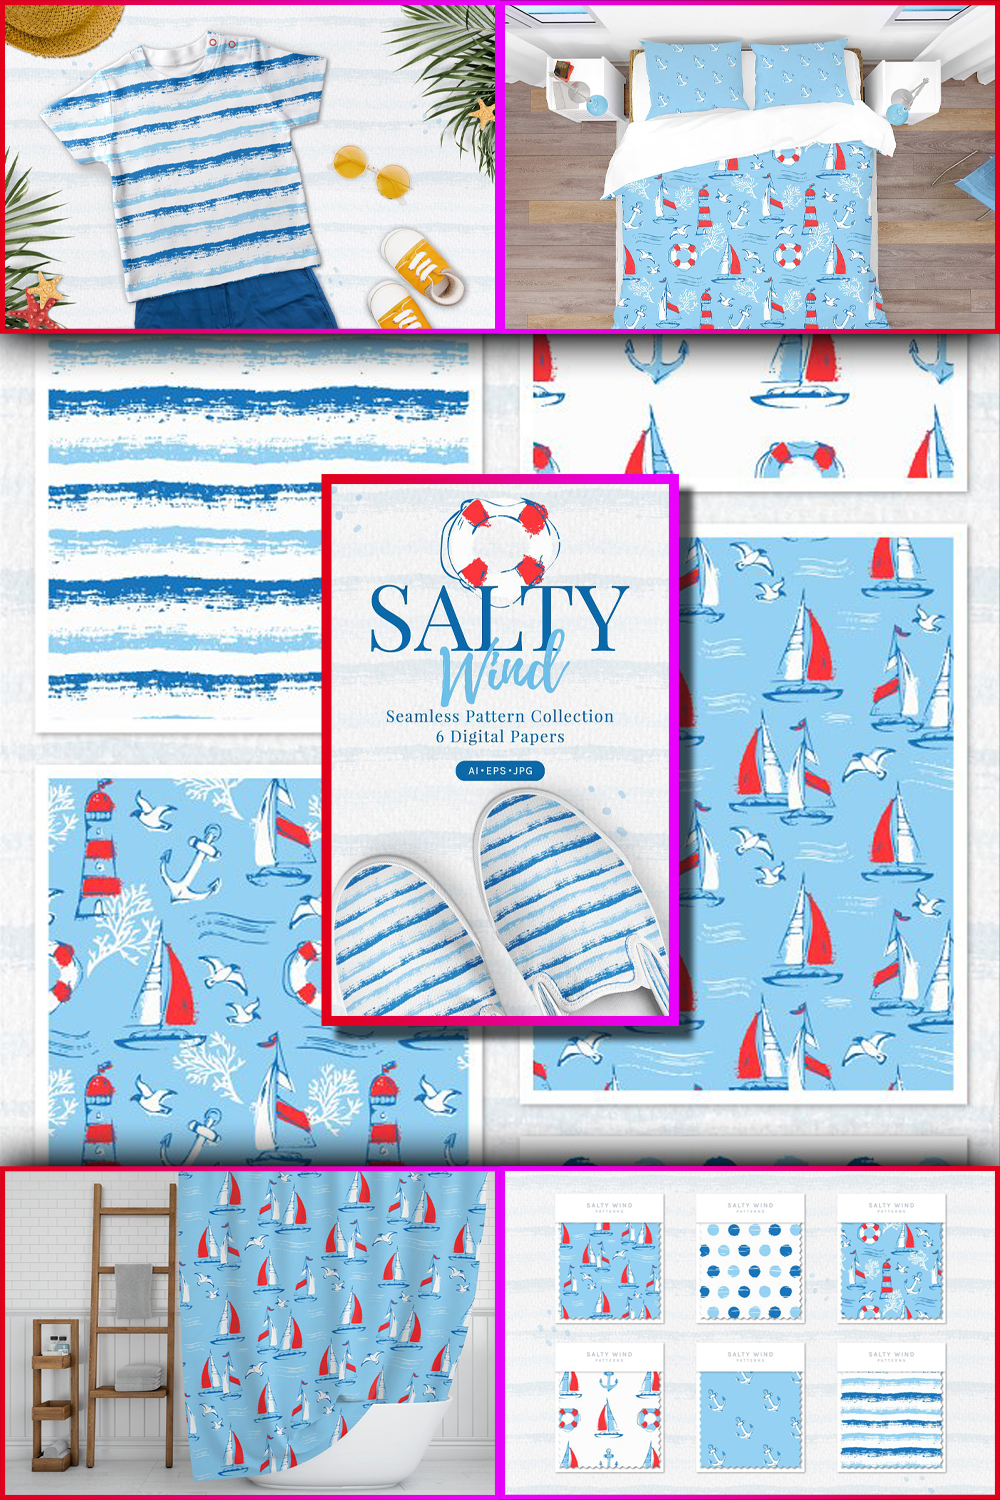 Illustrations salty wind patterns collection of pinterest.